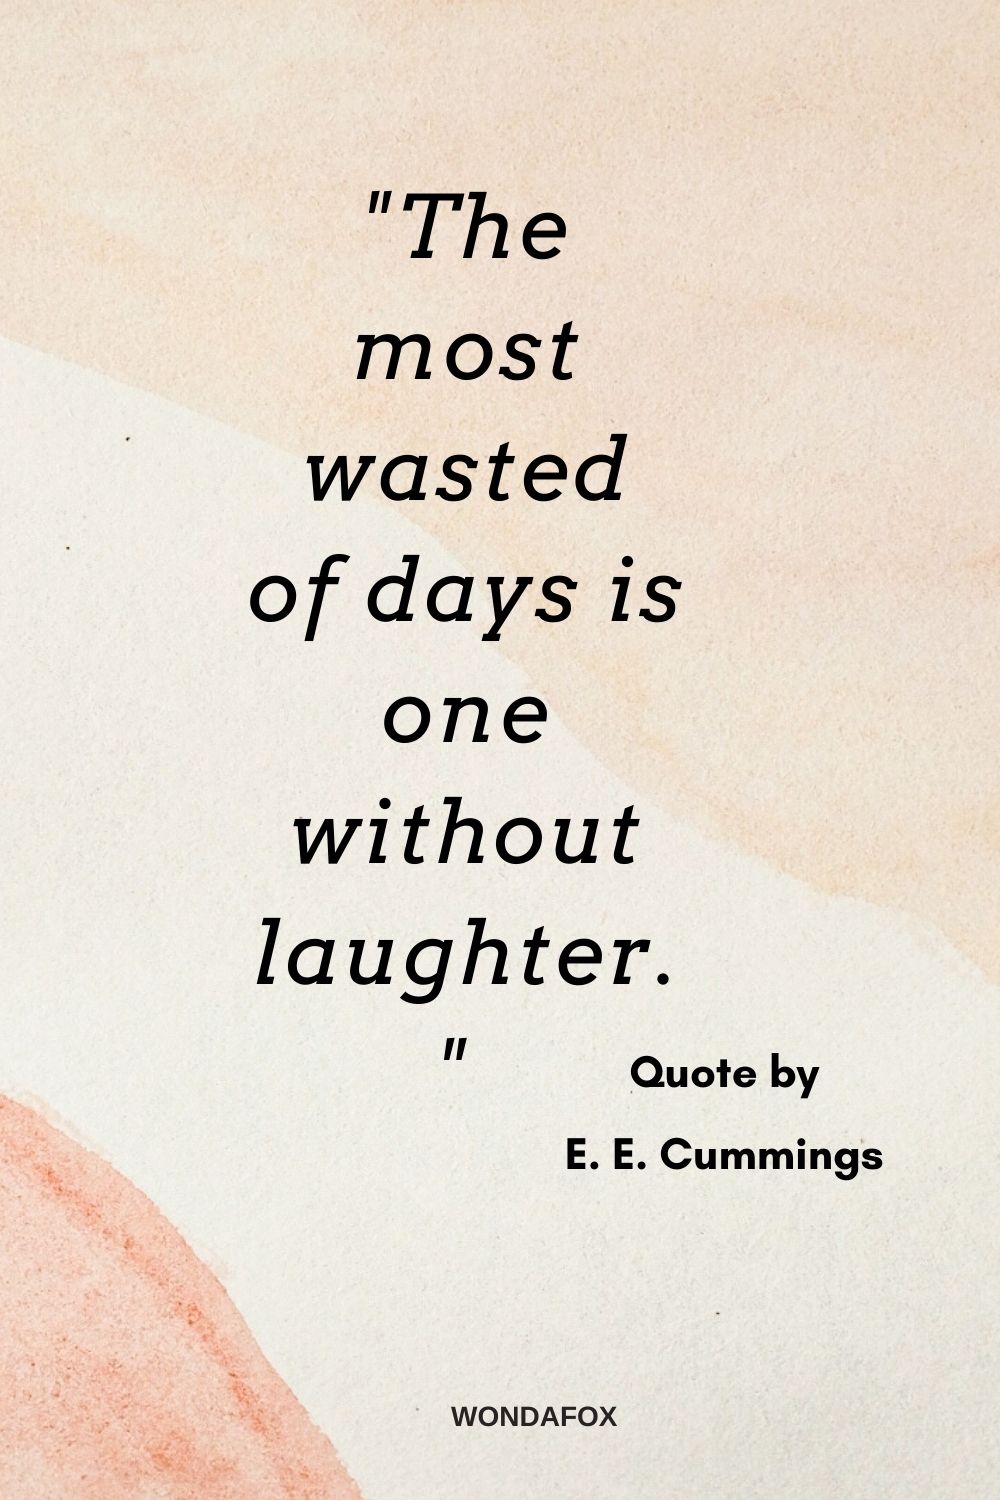 "The most wasted of days is one without laughter."
E. E. Cummings